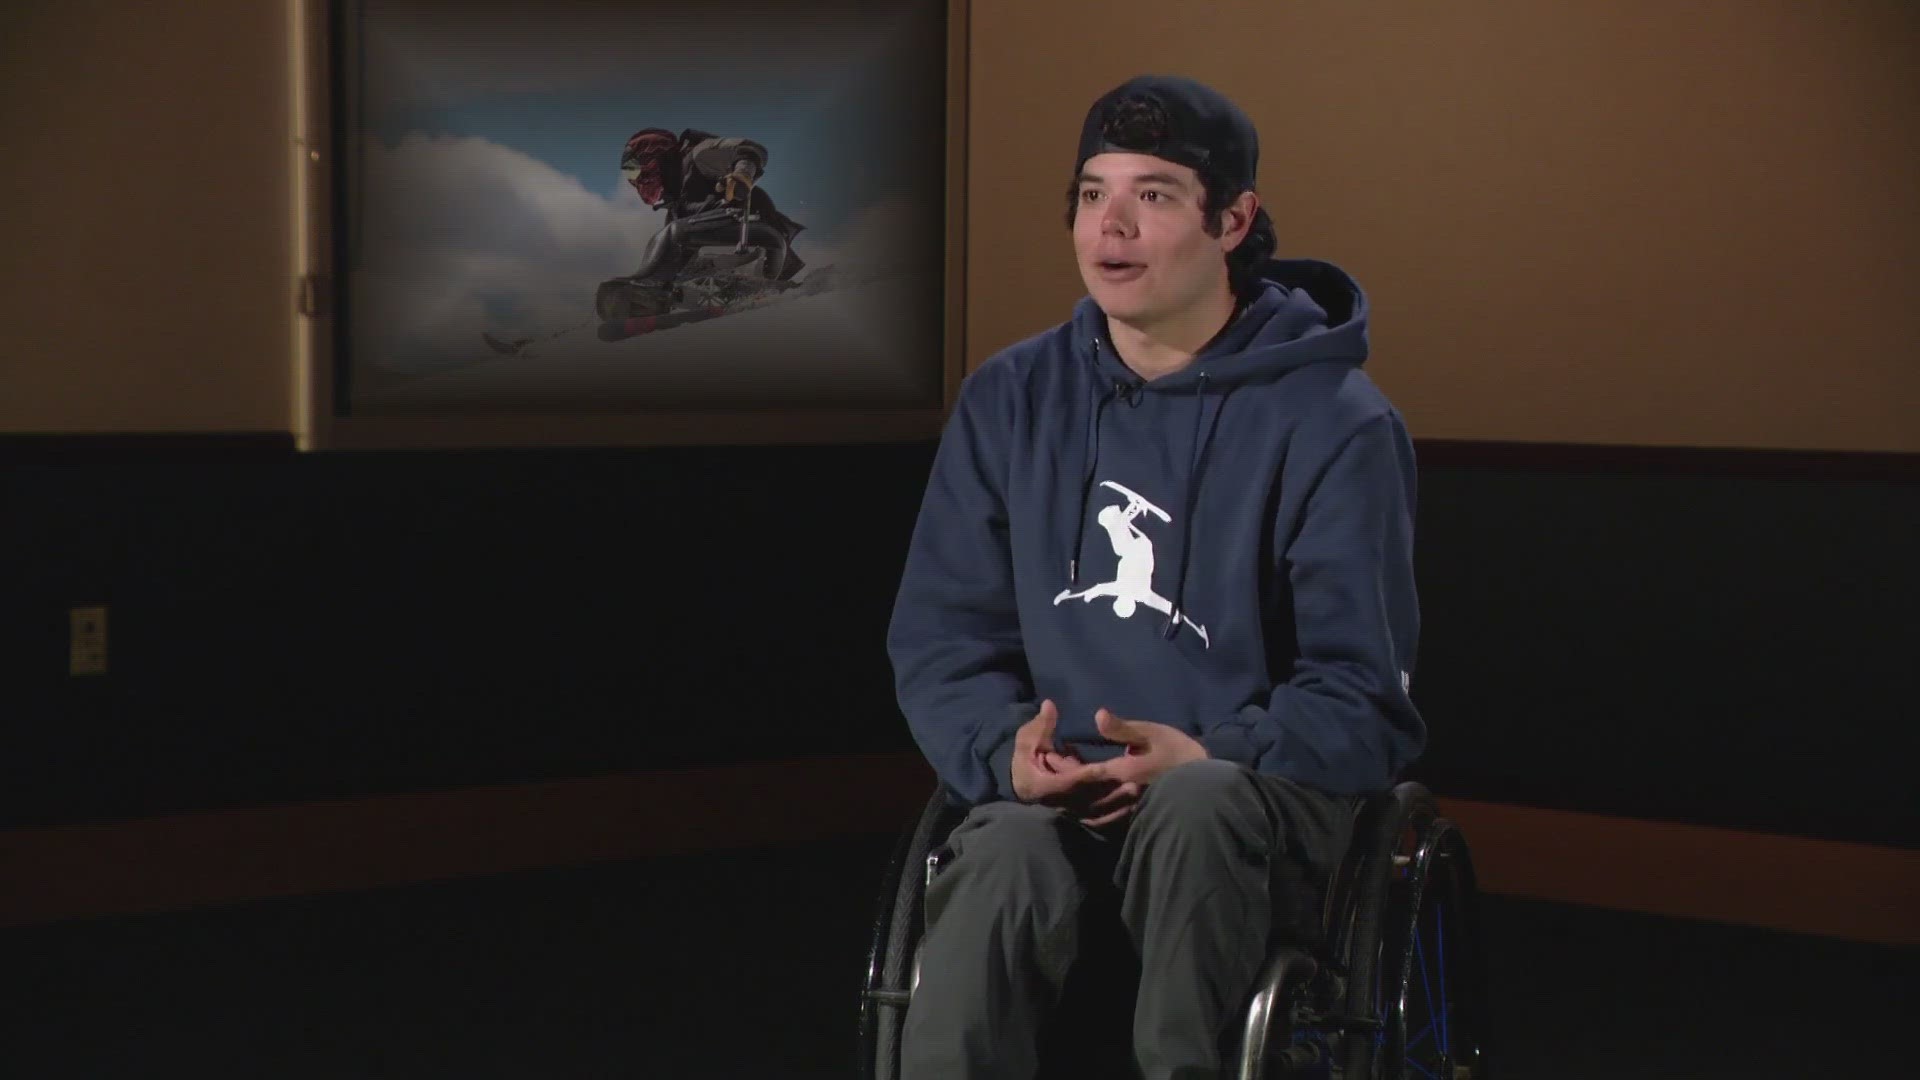 In 2014, Trevor Kennison was a plumber with a passion for snowboarding, until he broke his back on Vail Pass – reintroduced to an extreme ski sport